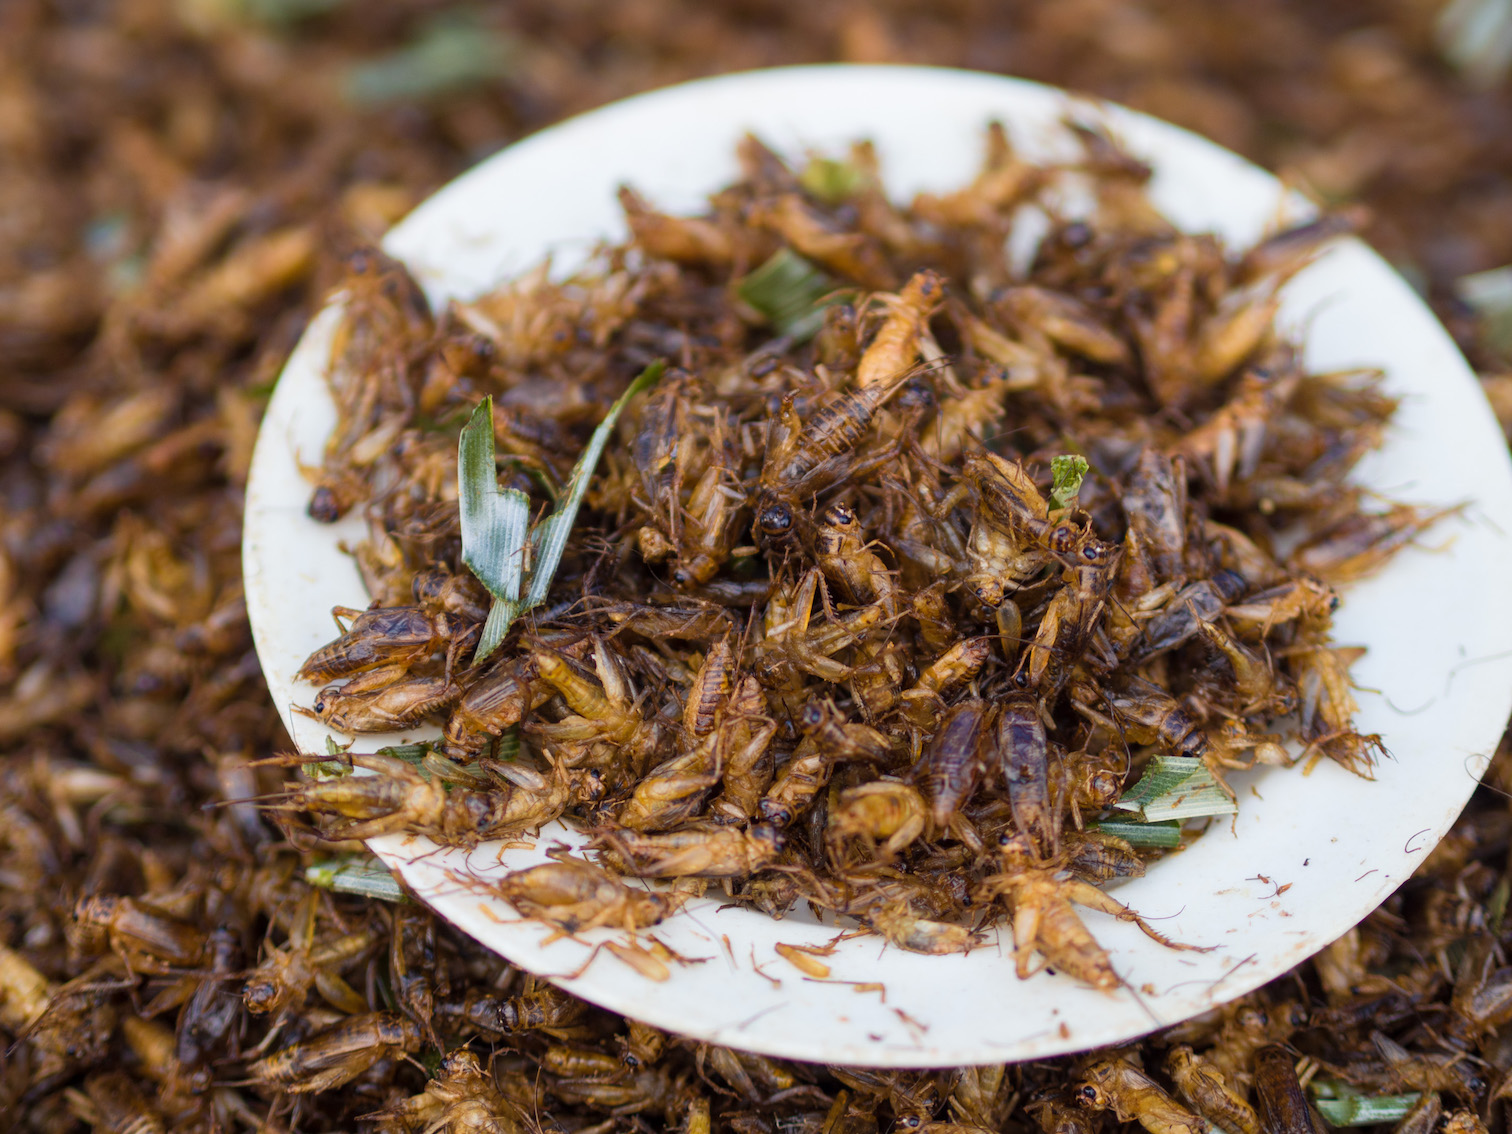 Edible insects could be headed to UK supermarkets as global elites’ push to replace meat intensifies